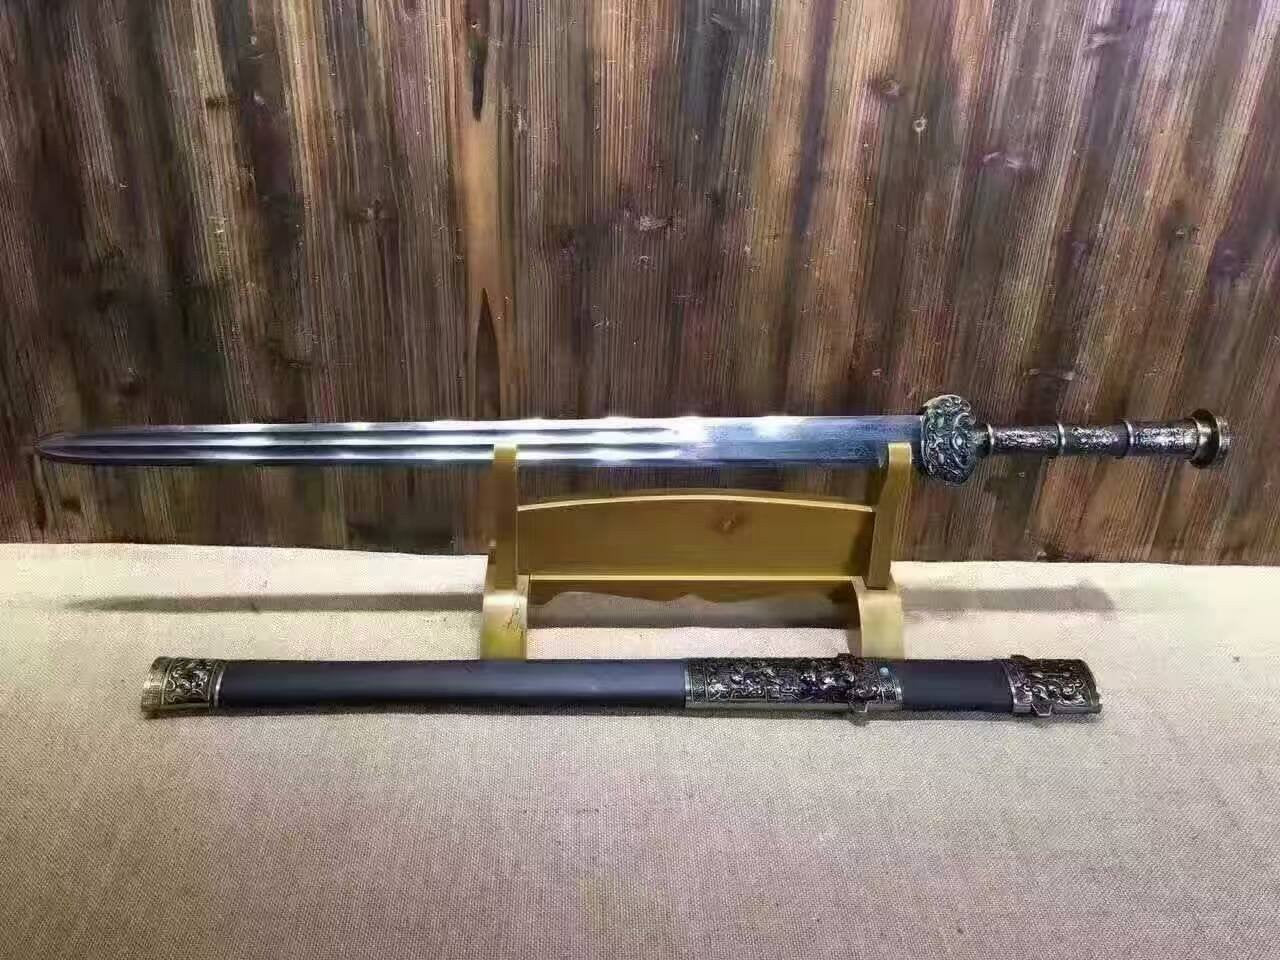 Warring States sword(Pattern steel blade,Black scabbard,Alloy fitted)Length 39" - Chinese sword shop